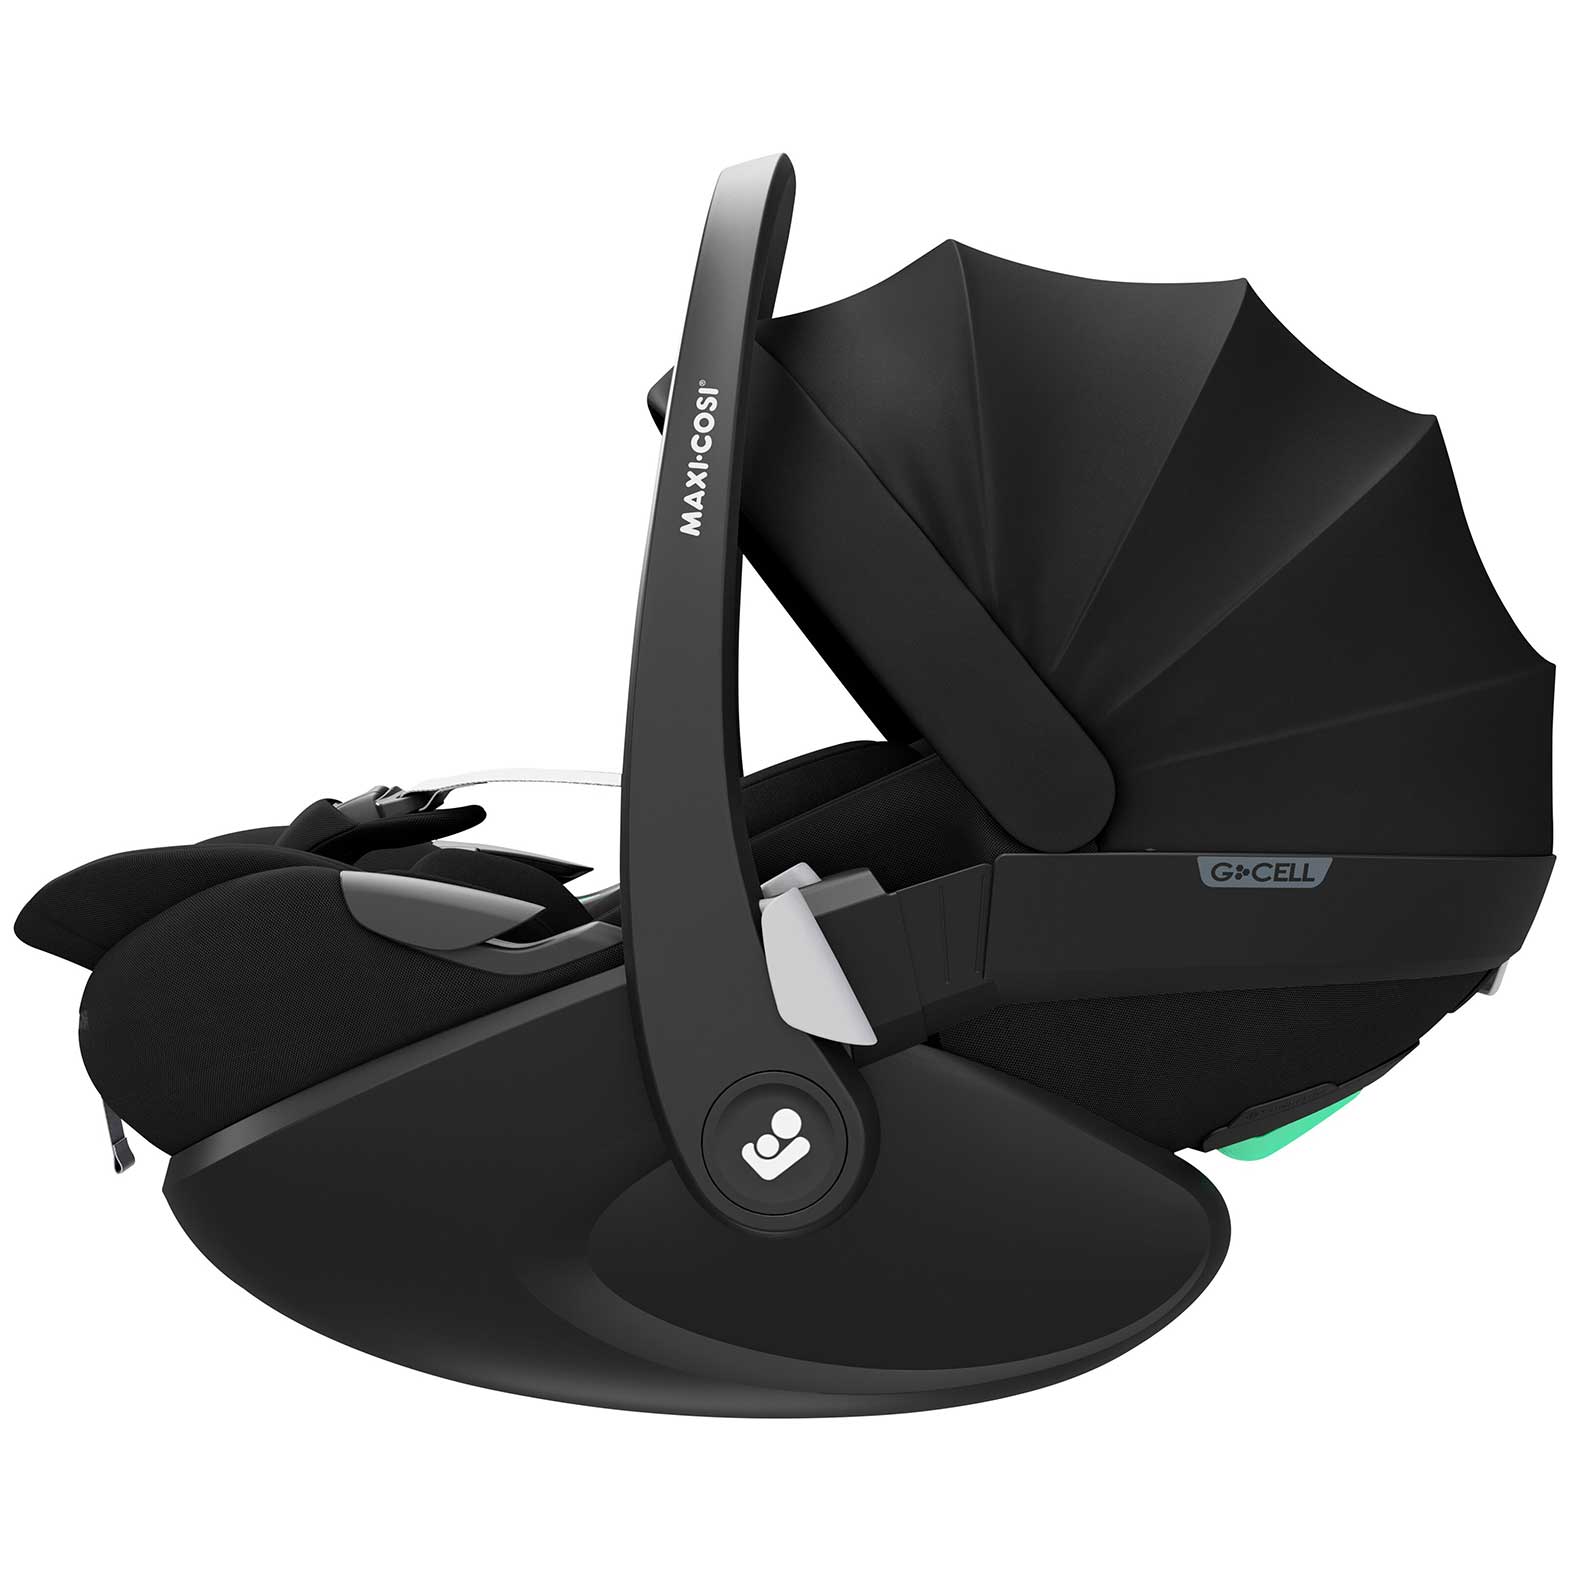 Bugaboo Travel Systems Bugaboo Dragonfly Pebble 360 Pro Travel System - Black/Midnight Black 13817-BLK-MID-BLK